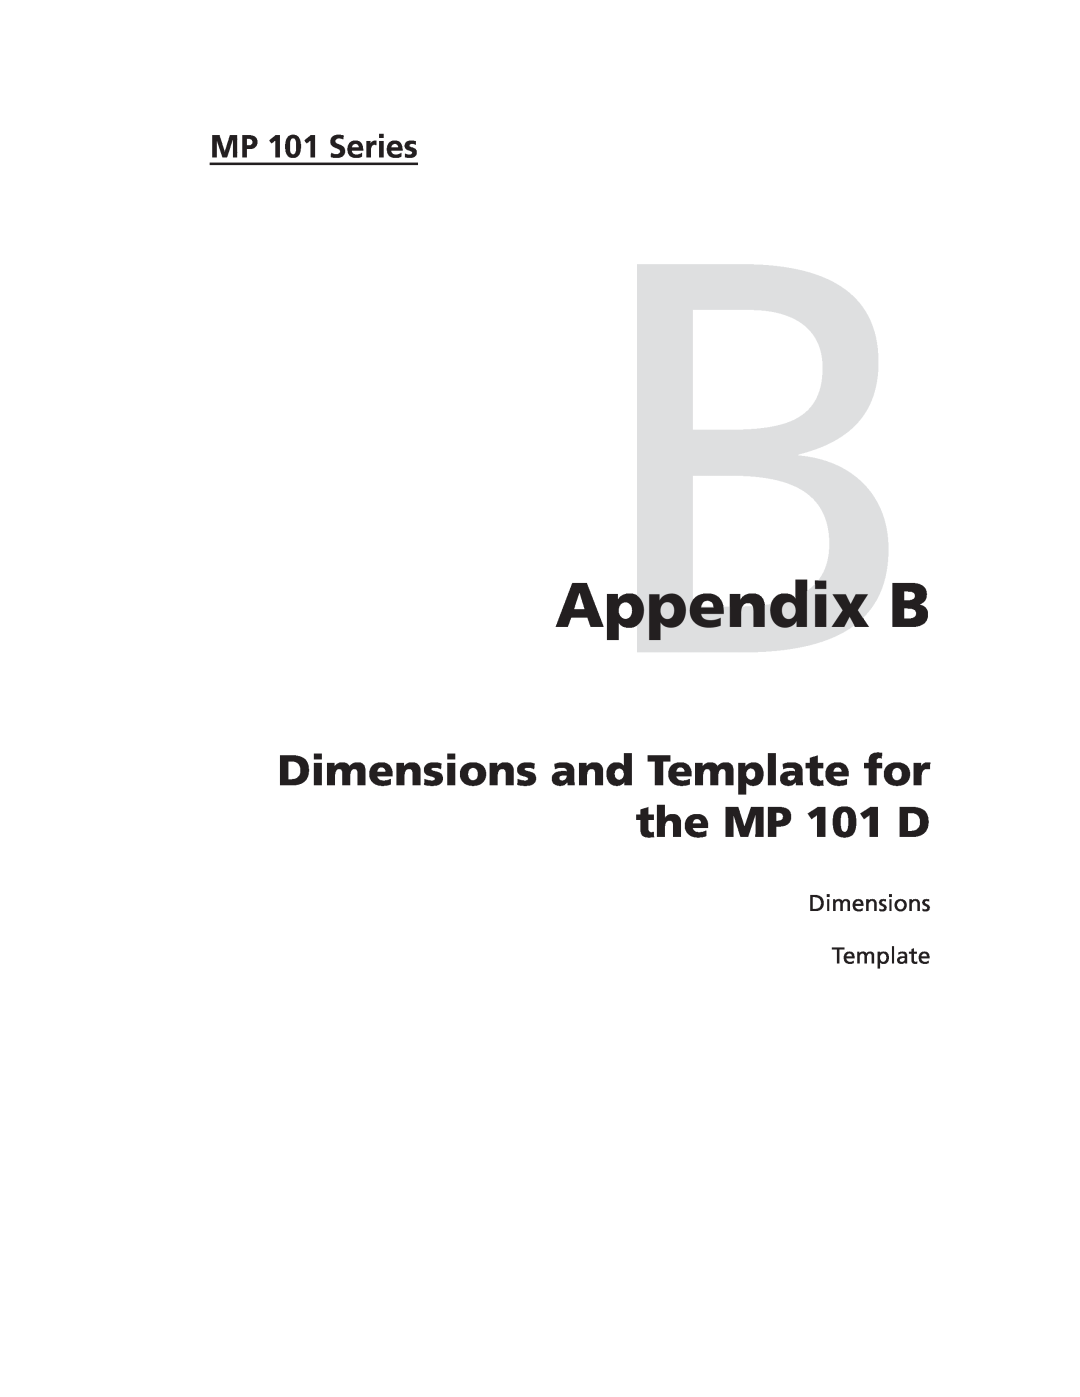 Extron electronic user manual AppendixBB, Dimensions and Template for the MP 101 D, Dimensions Template, MP 101 Series 